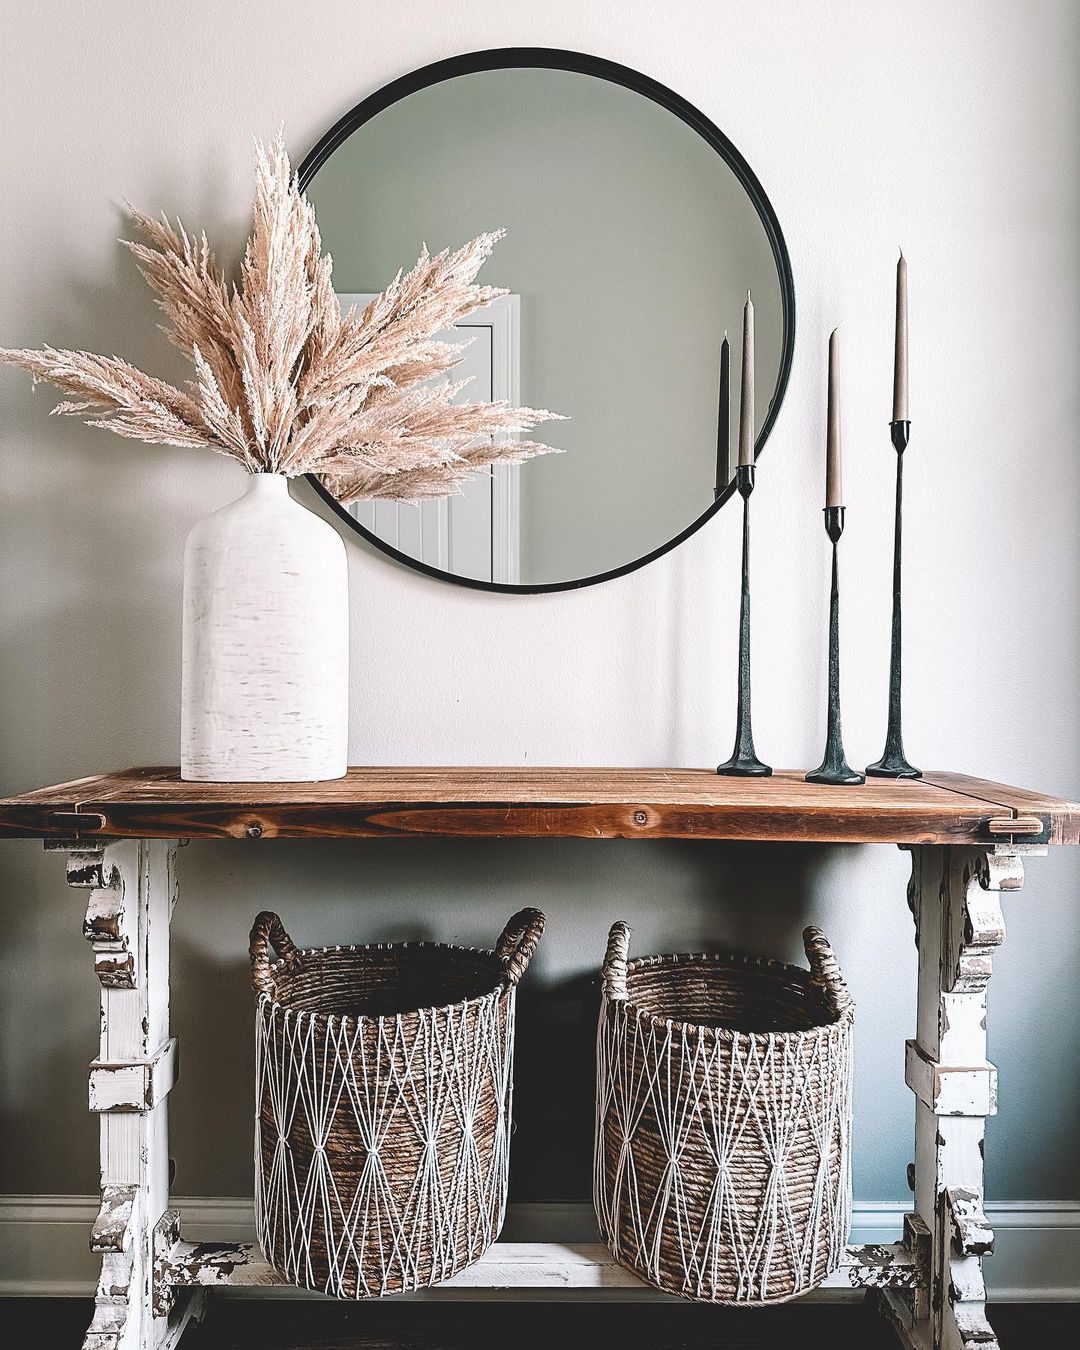 entryway console styled with a flower vase and candles holders with storage baskets underneath and round wall mirror